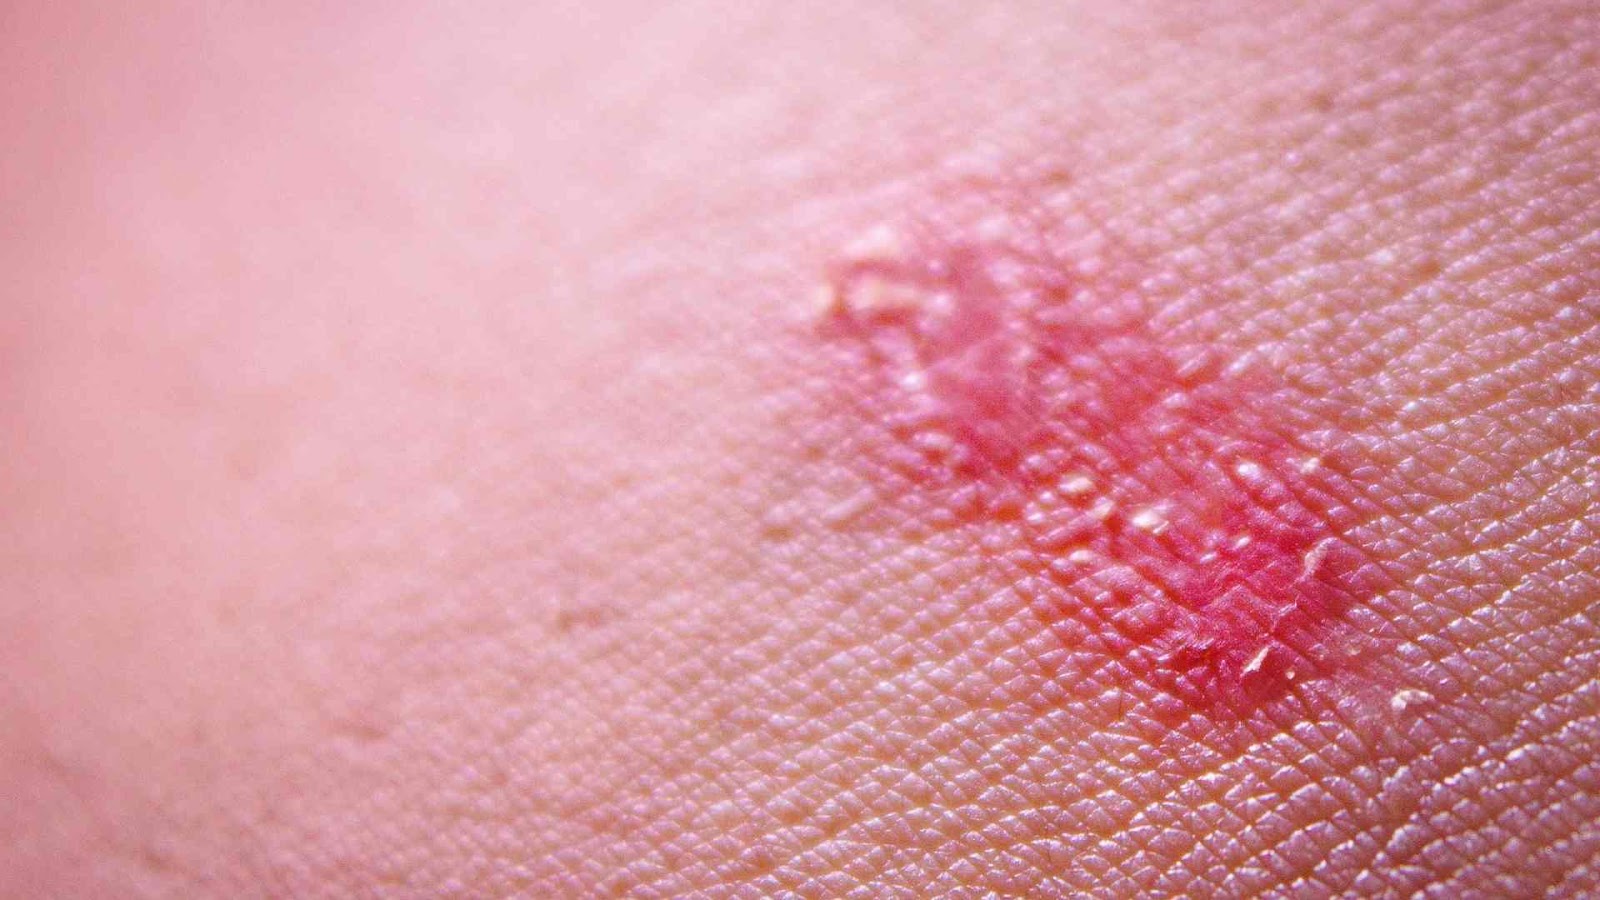 Skin infections can occur as a result of tearing or cuts exacerbated by thin skin caused by hydrocortisone and other topical steroids.